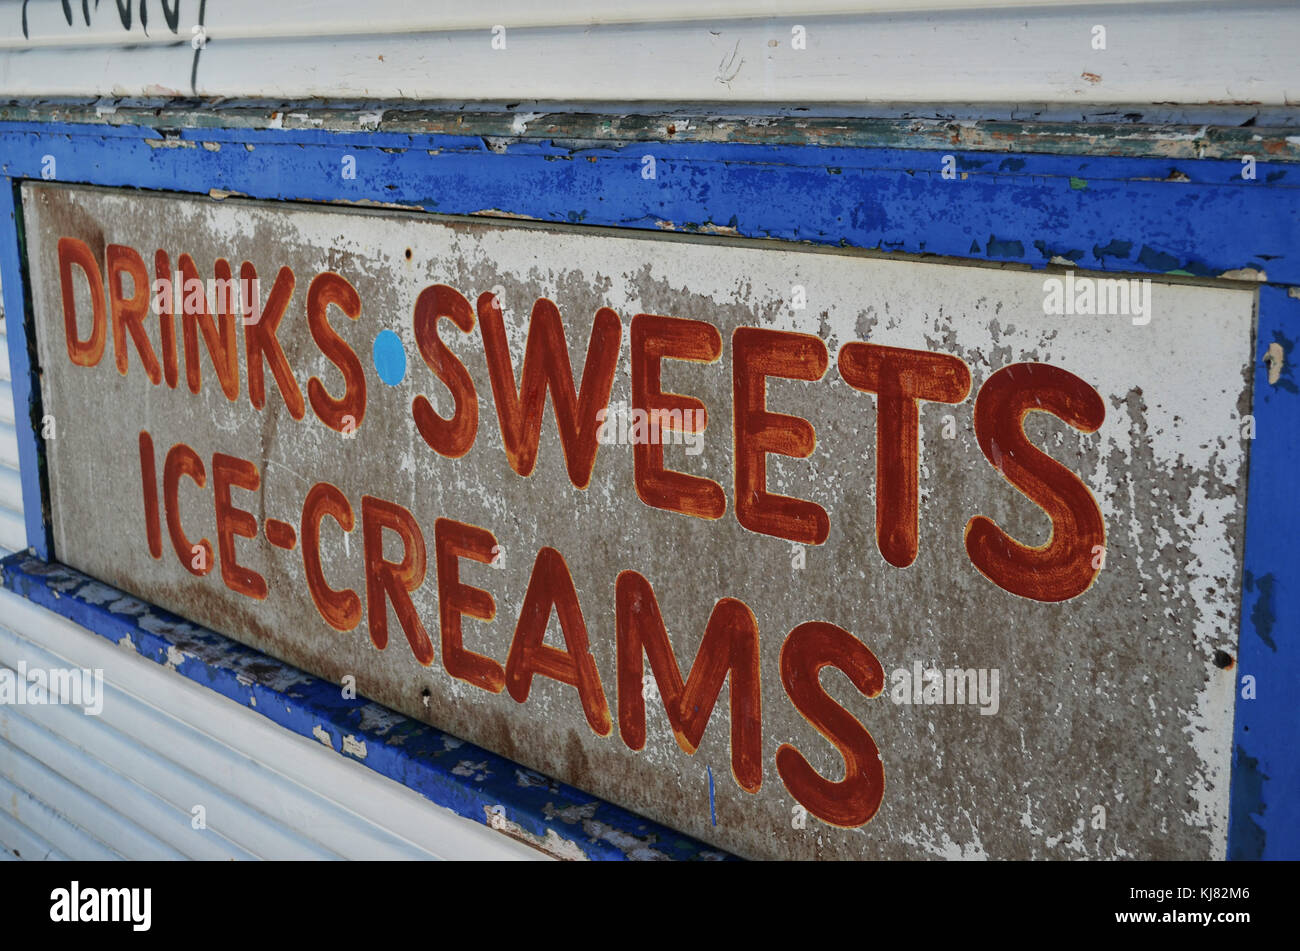 sign showing drinks sweets and ice creams at The Entrance Central Coast NSW Australia Stock Photo